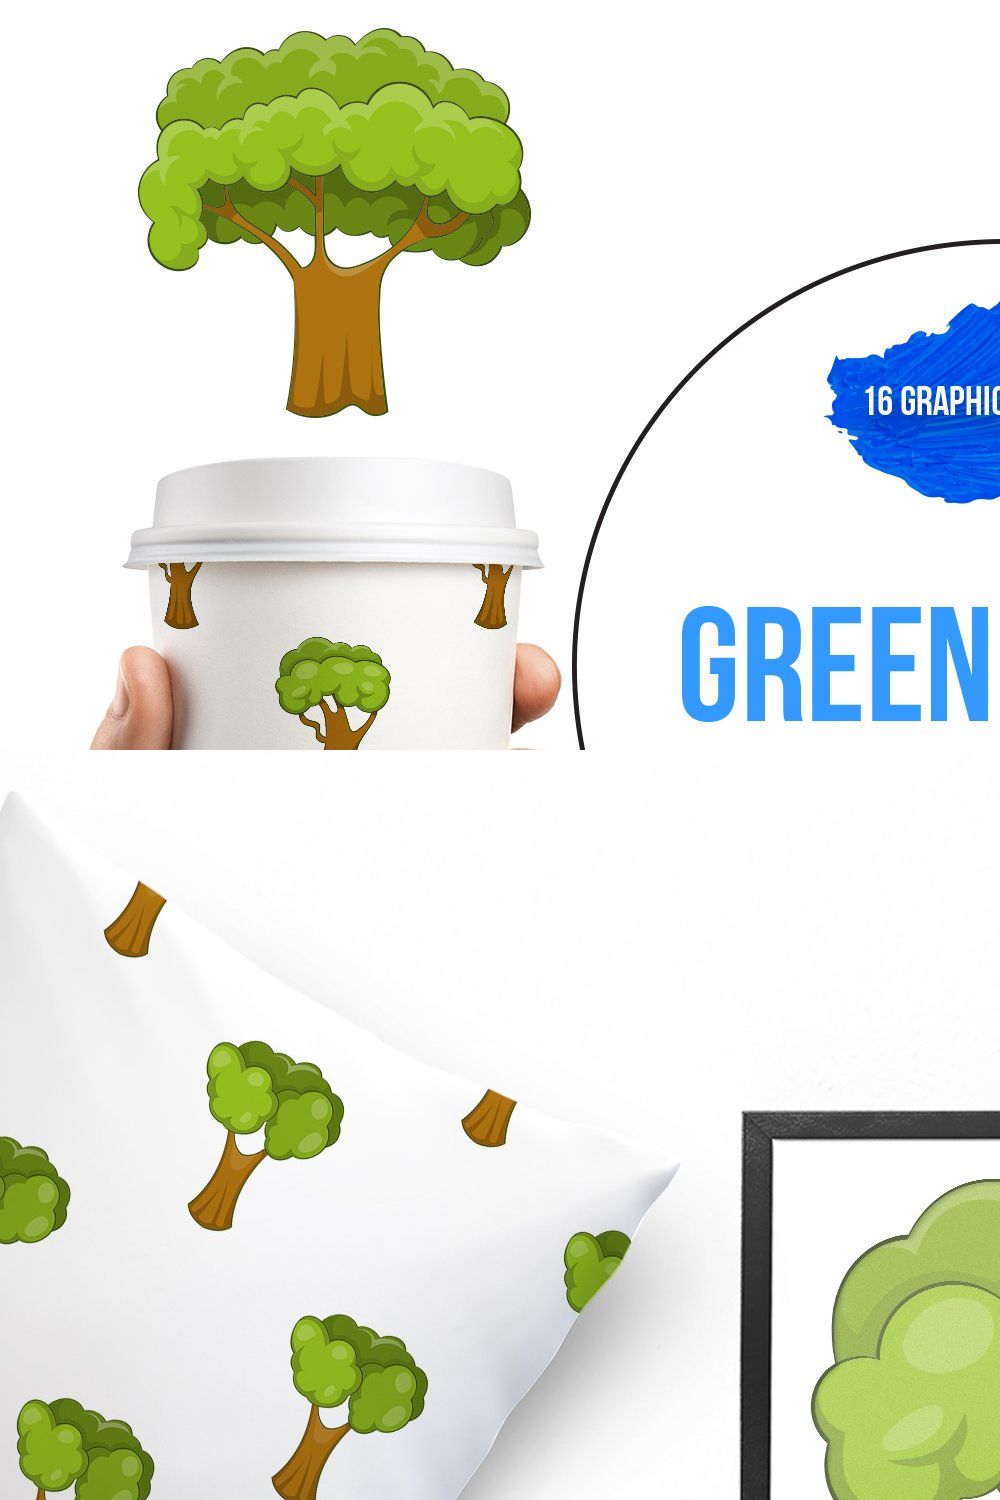 Green trees icons set, cartoon style pinterest preview image.